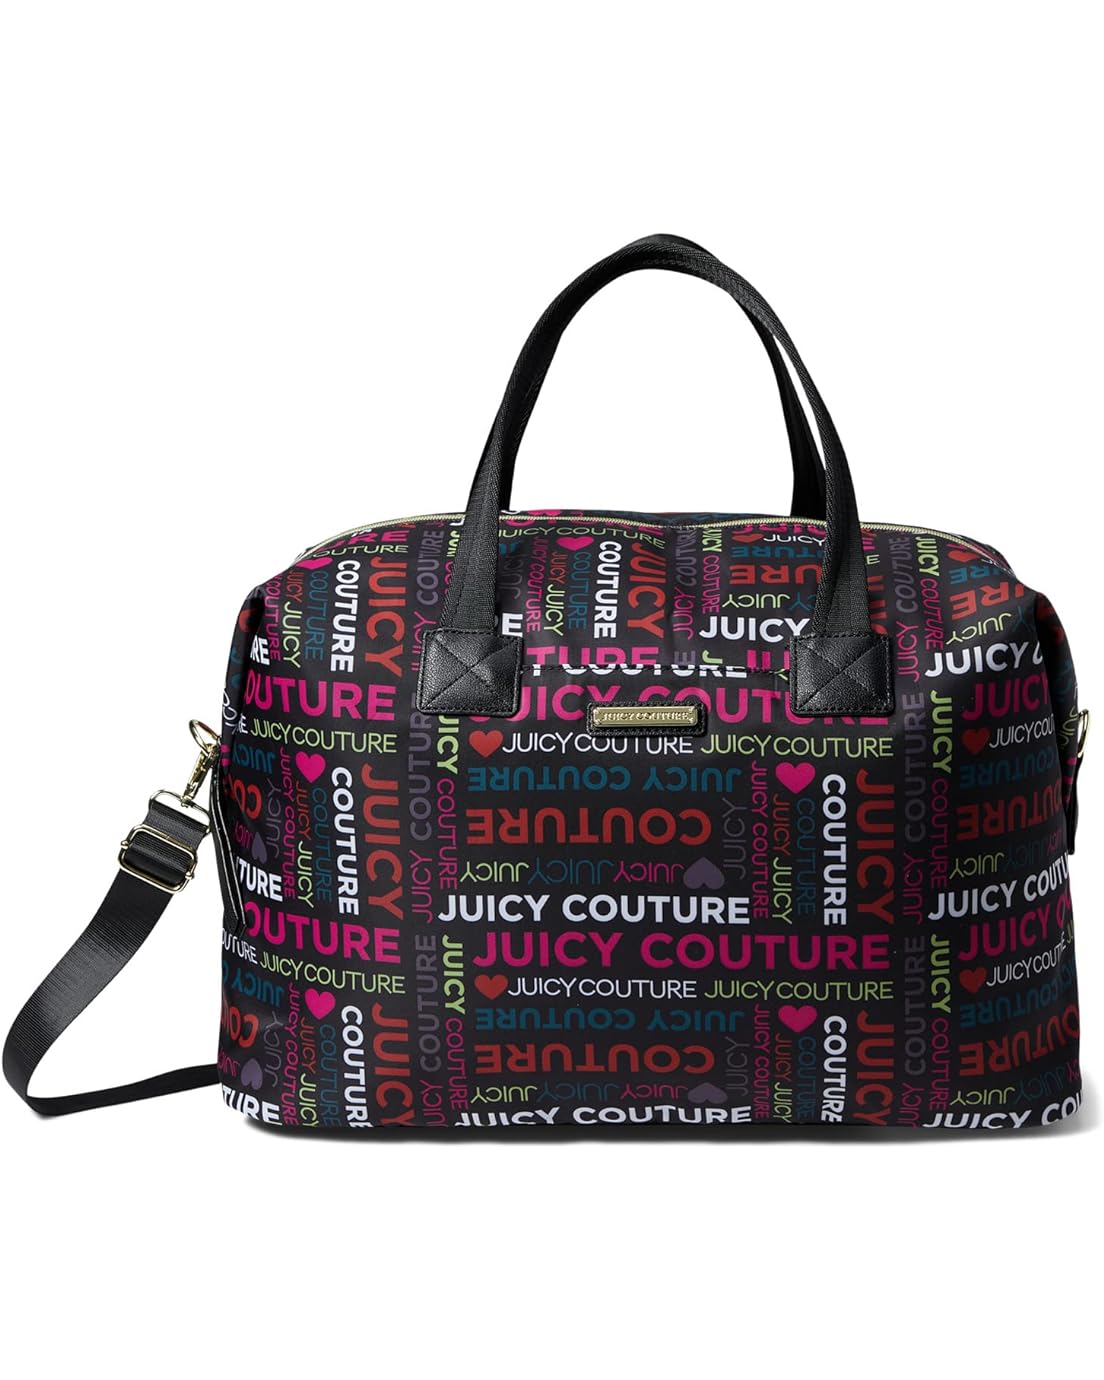 Juicy Couture Word Play Overnighter